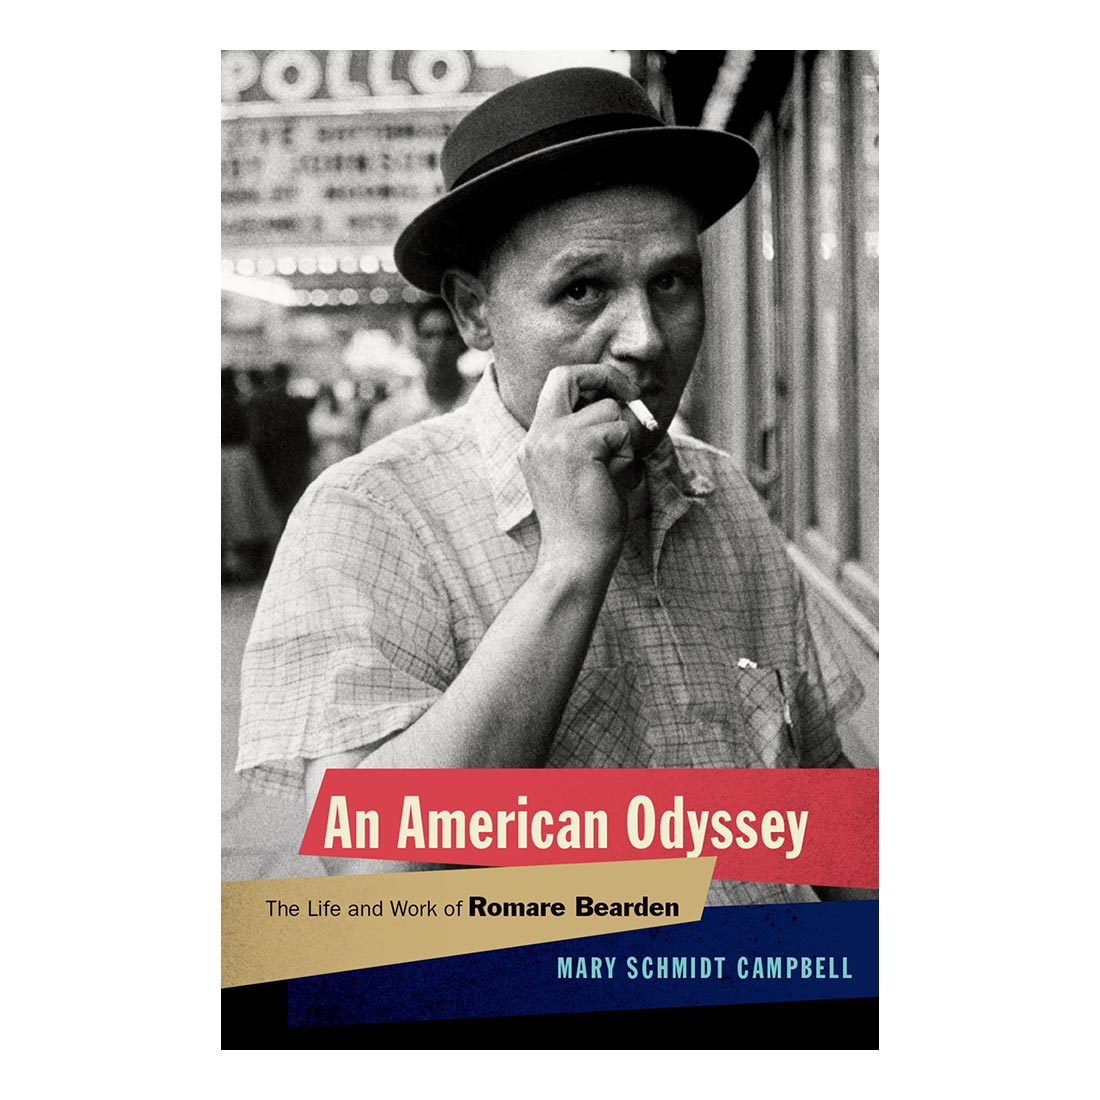 An American Odyssey: The Life and Work of Romare Bearden